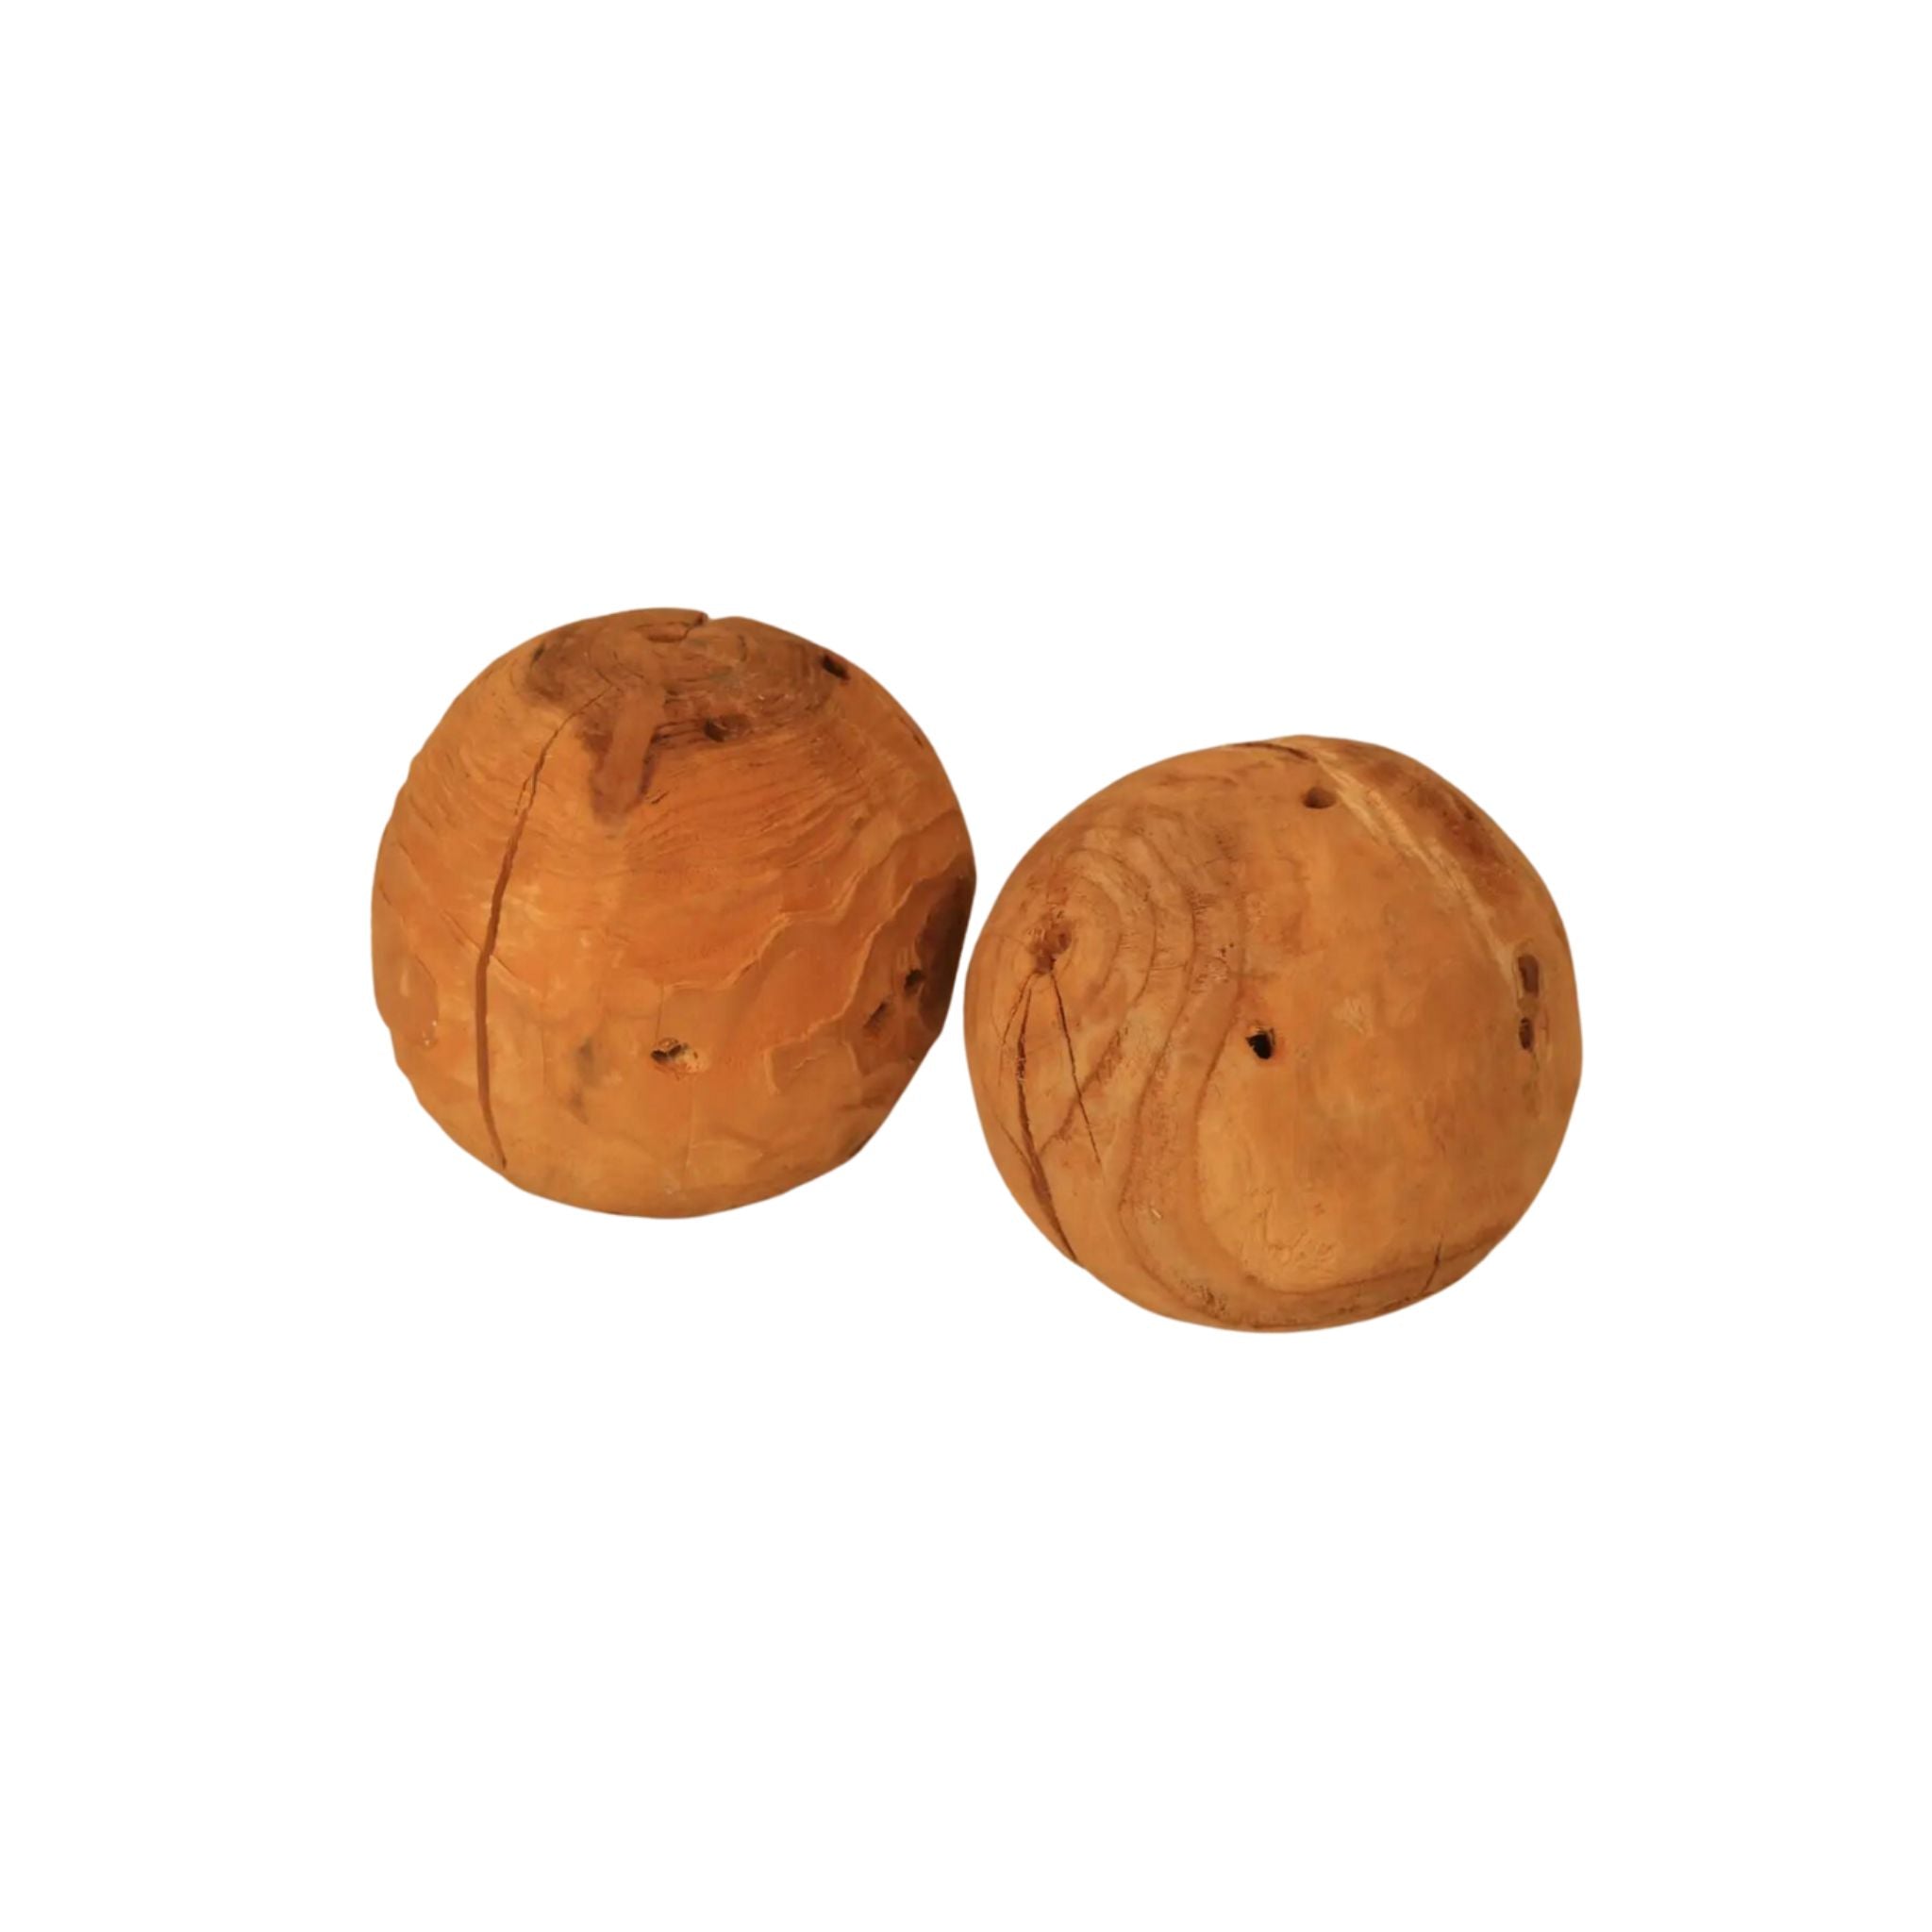 Decorative 10” wood orbs. This piece is cut and sanded leaving a natural smooth and rough decor. A warm accent for tray or bowl. - Simply Elevated